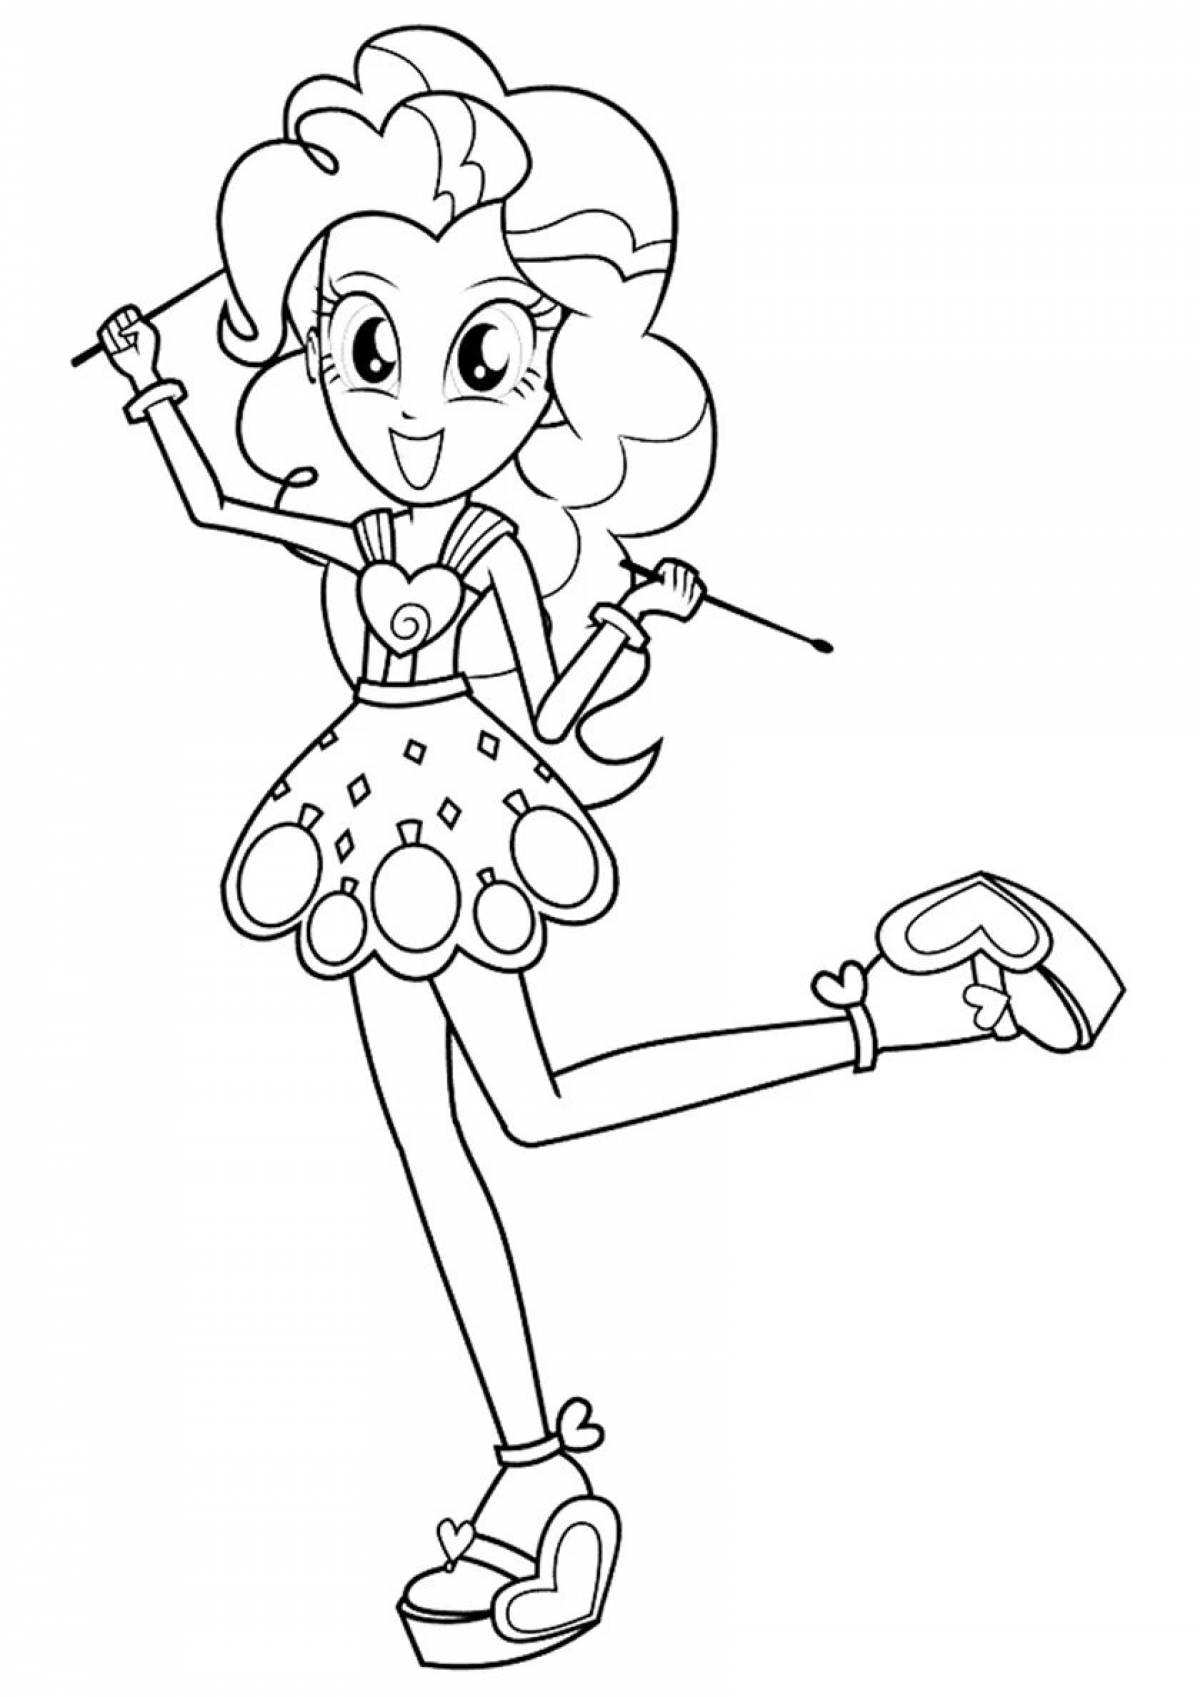 Pinkie Pie cute equestria girls coloring page